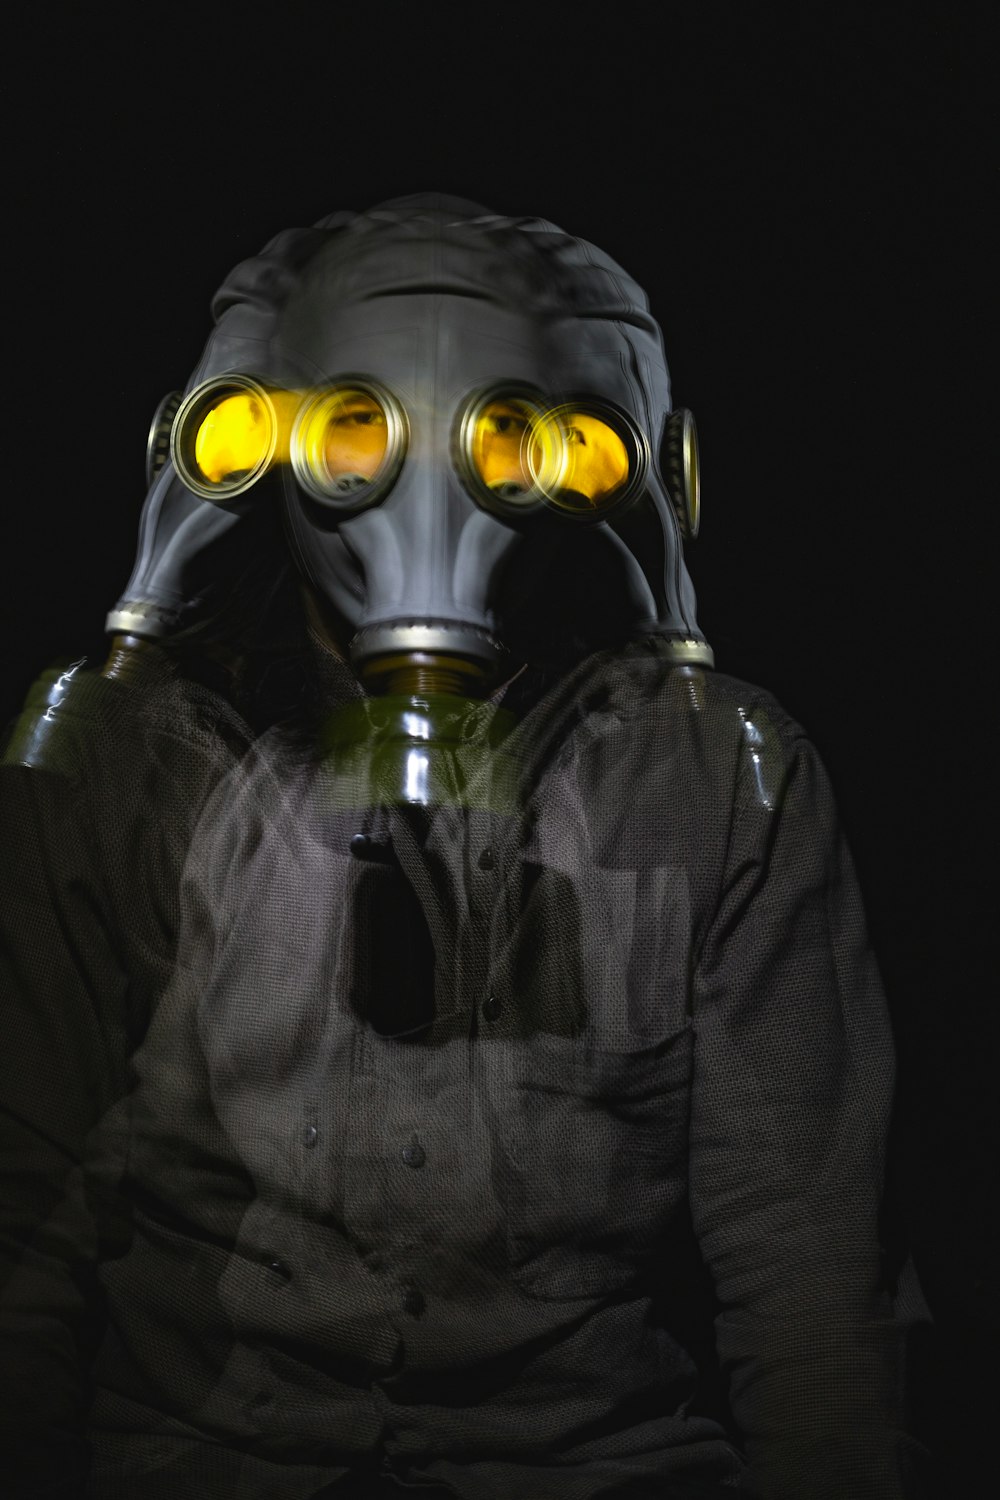 person in black and gray zip up jacket wearing gas mask